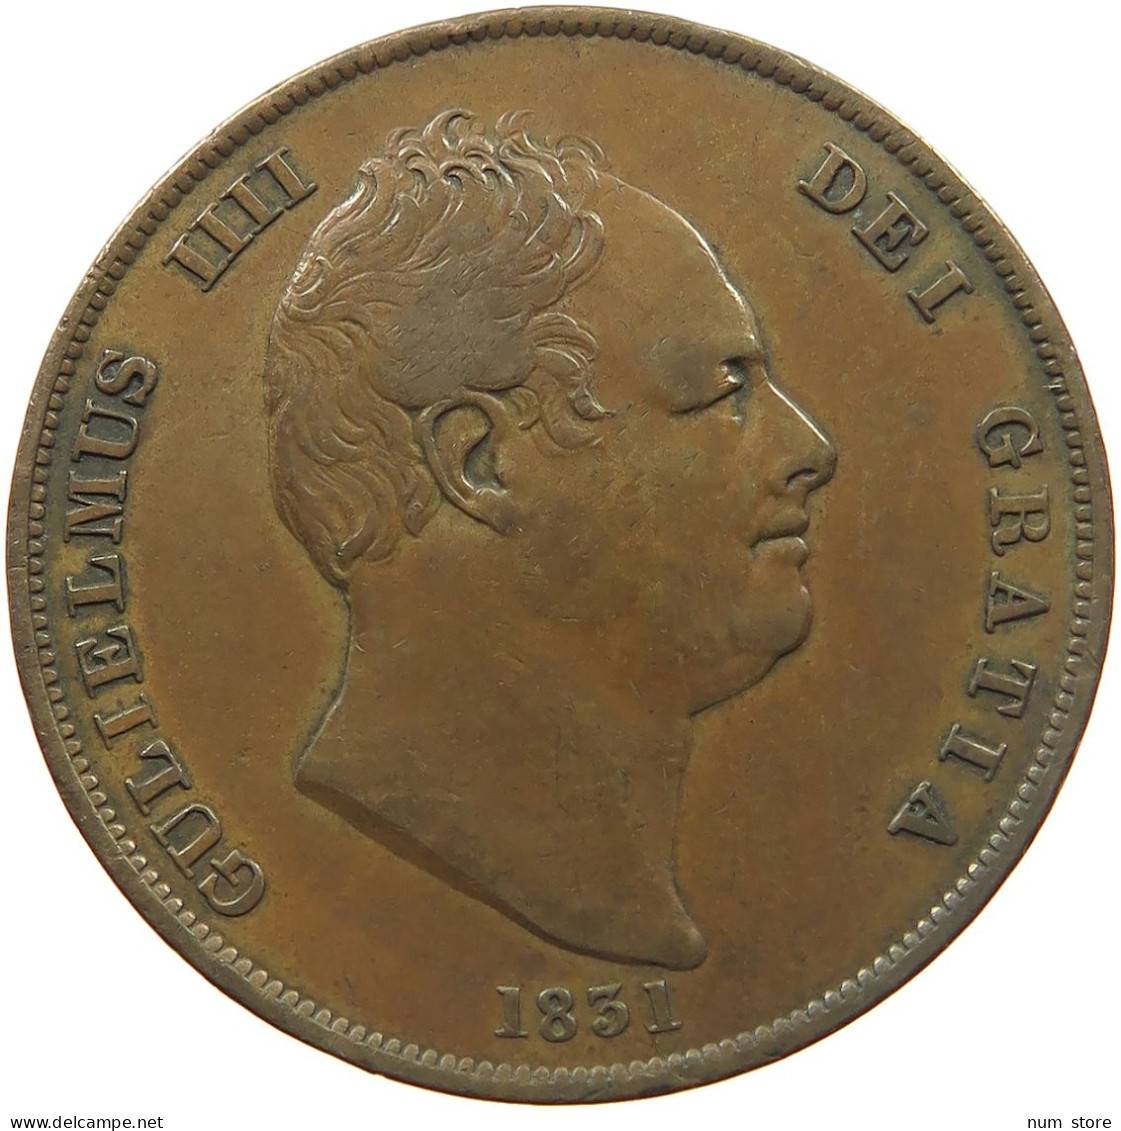 GREAT BRITAIN PENNY 1831 WILLIAM IV. (1830-1837) #MA 023027 - D. 1 Penny